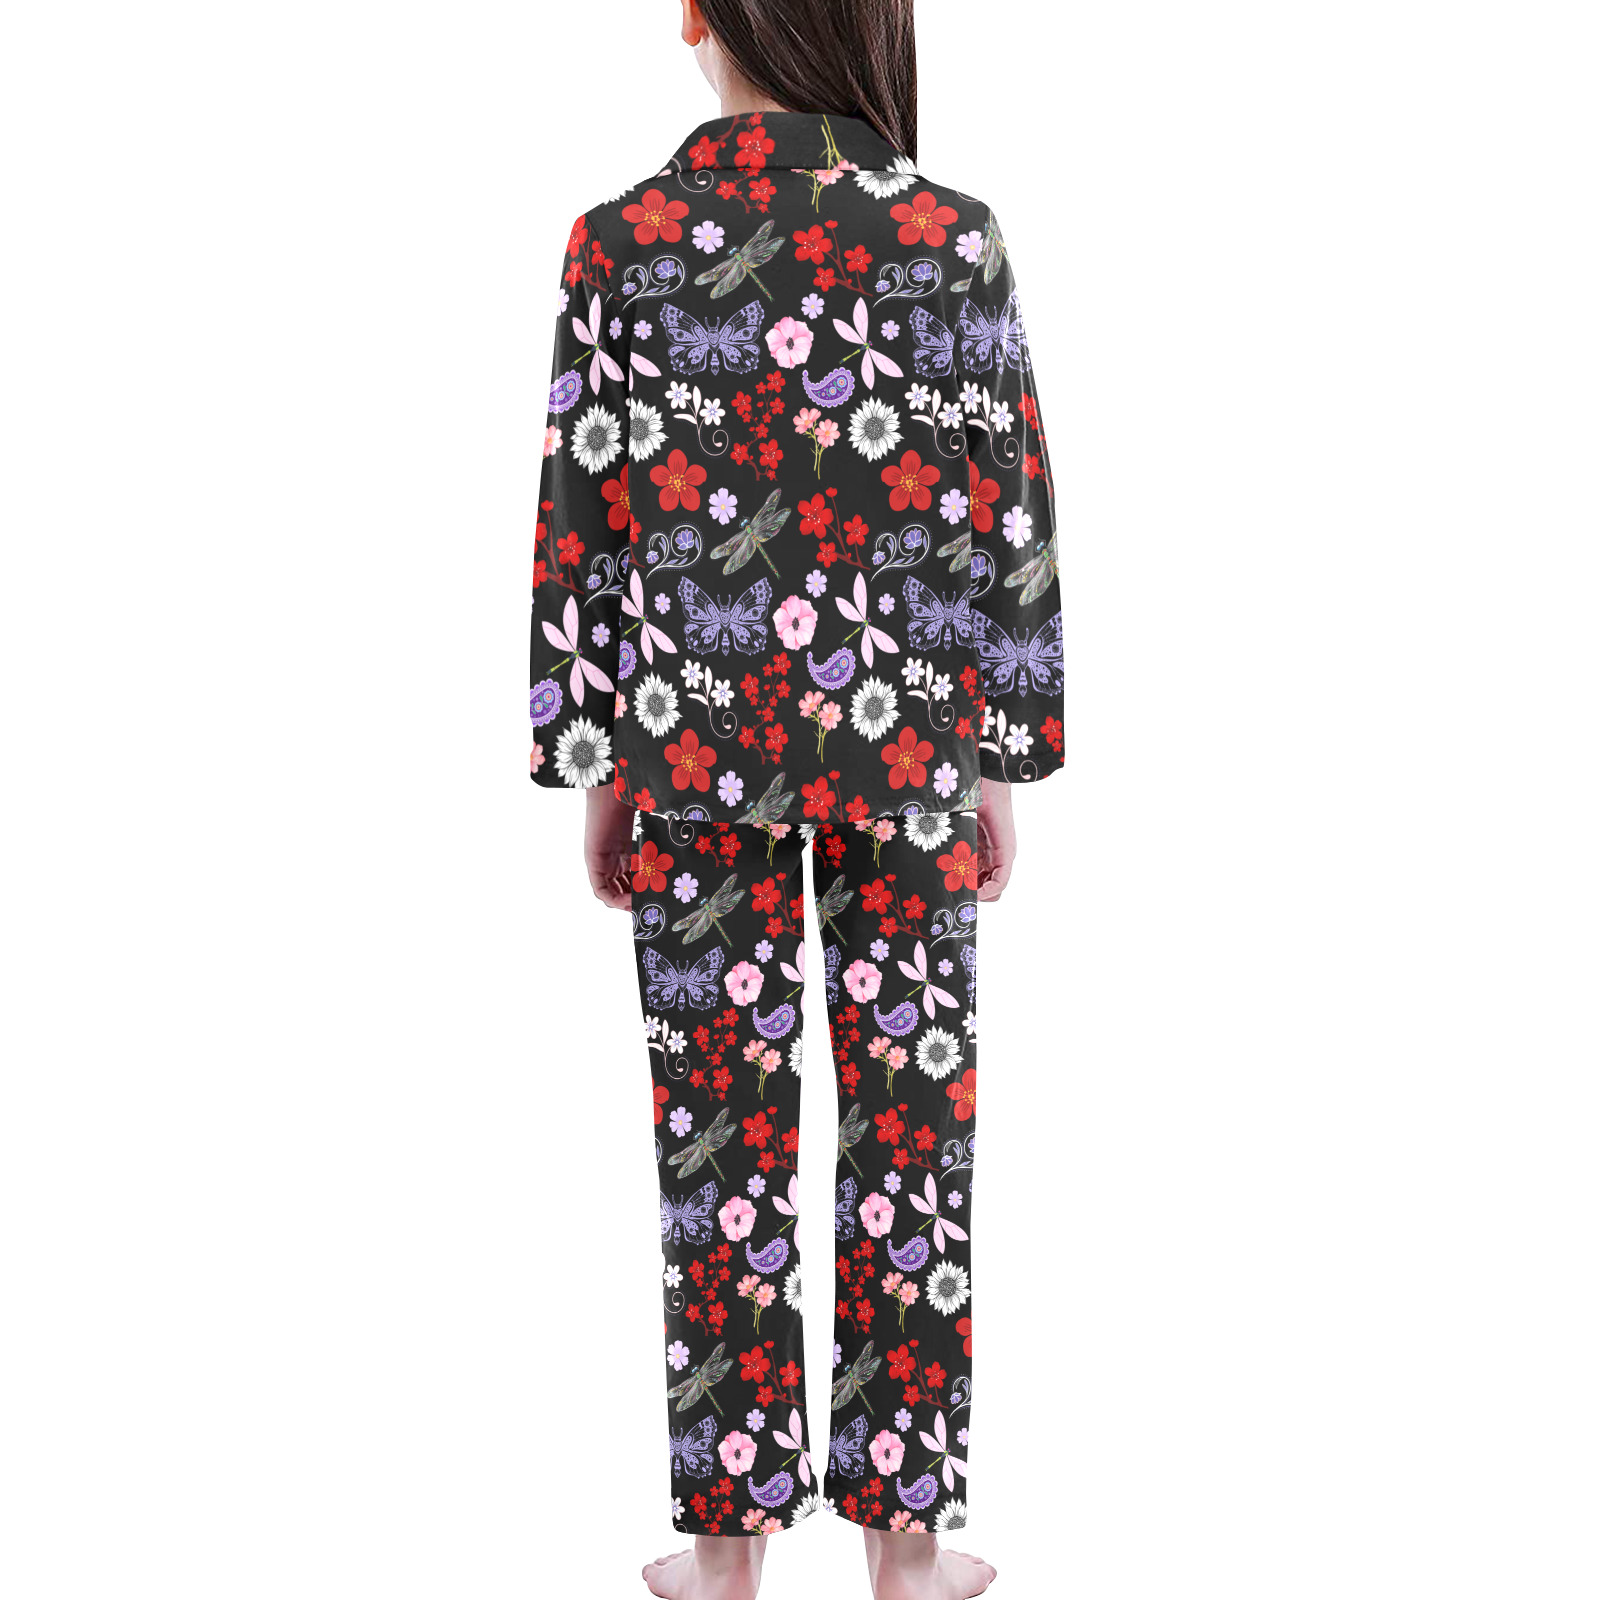 Black, Red, Pink, Purple, Dragonflies, Butterfly and Flowers Design Big Girls' V-Neck Long Pajama Set